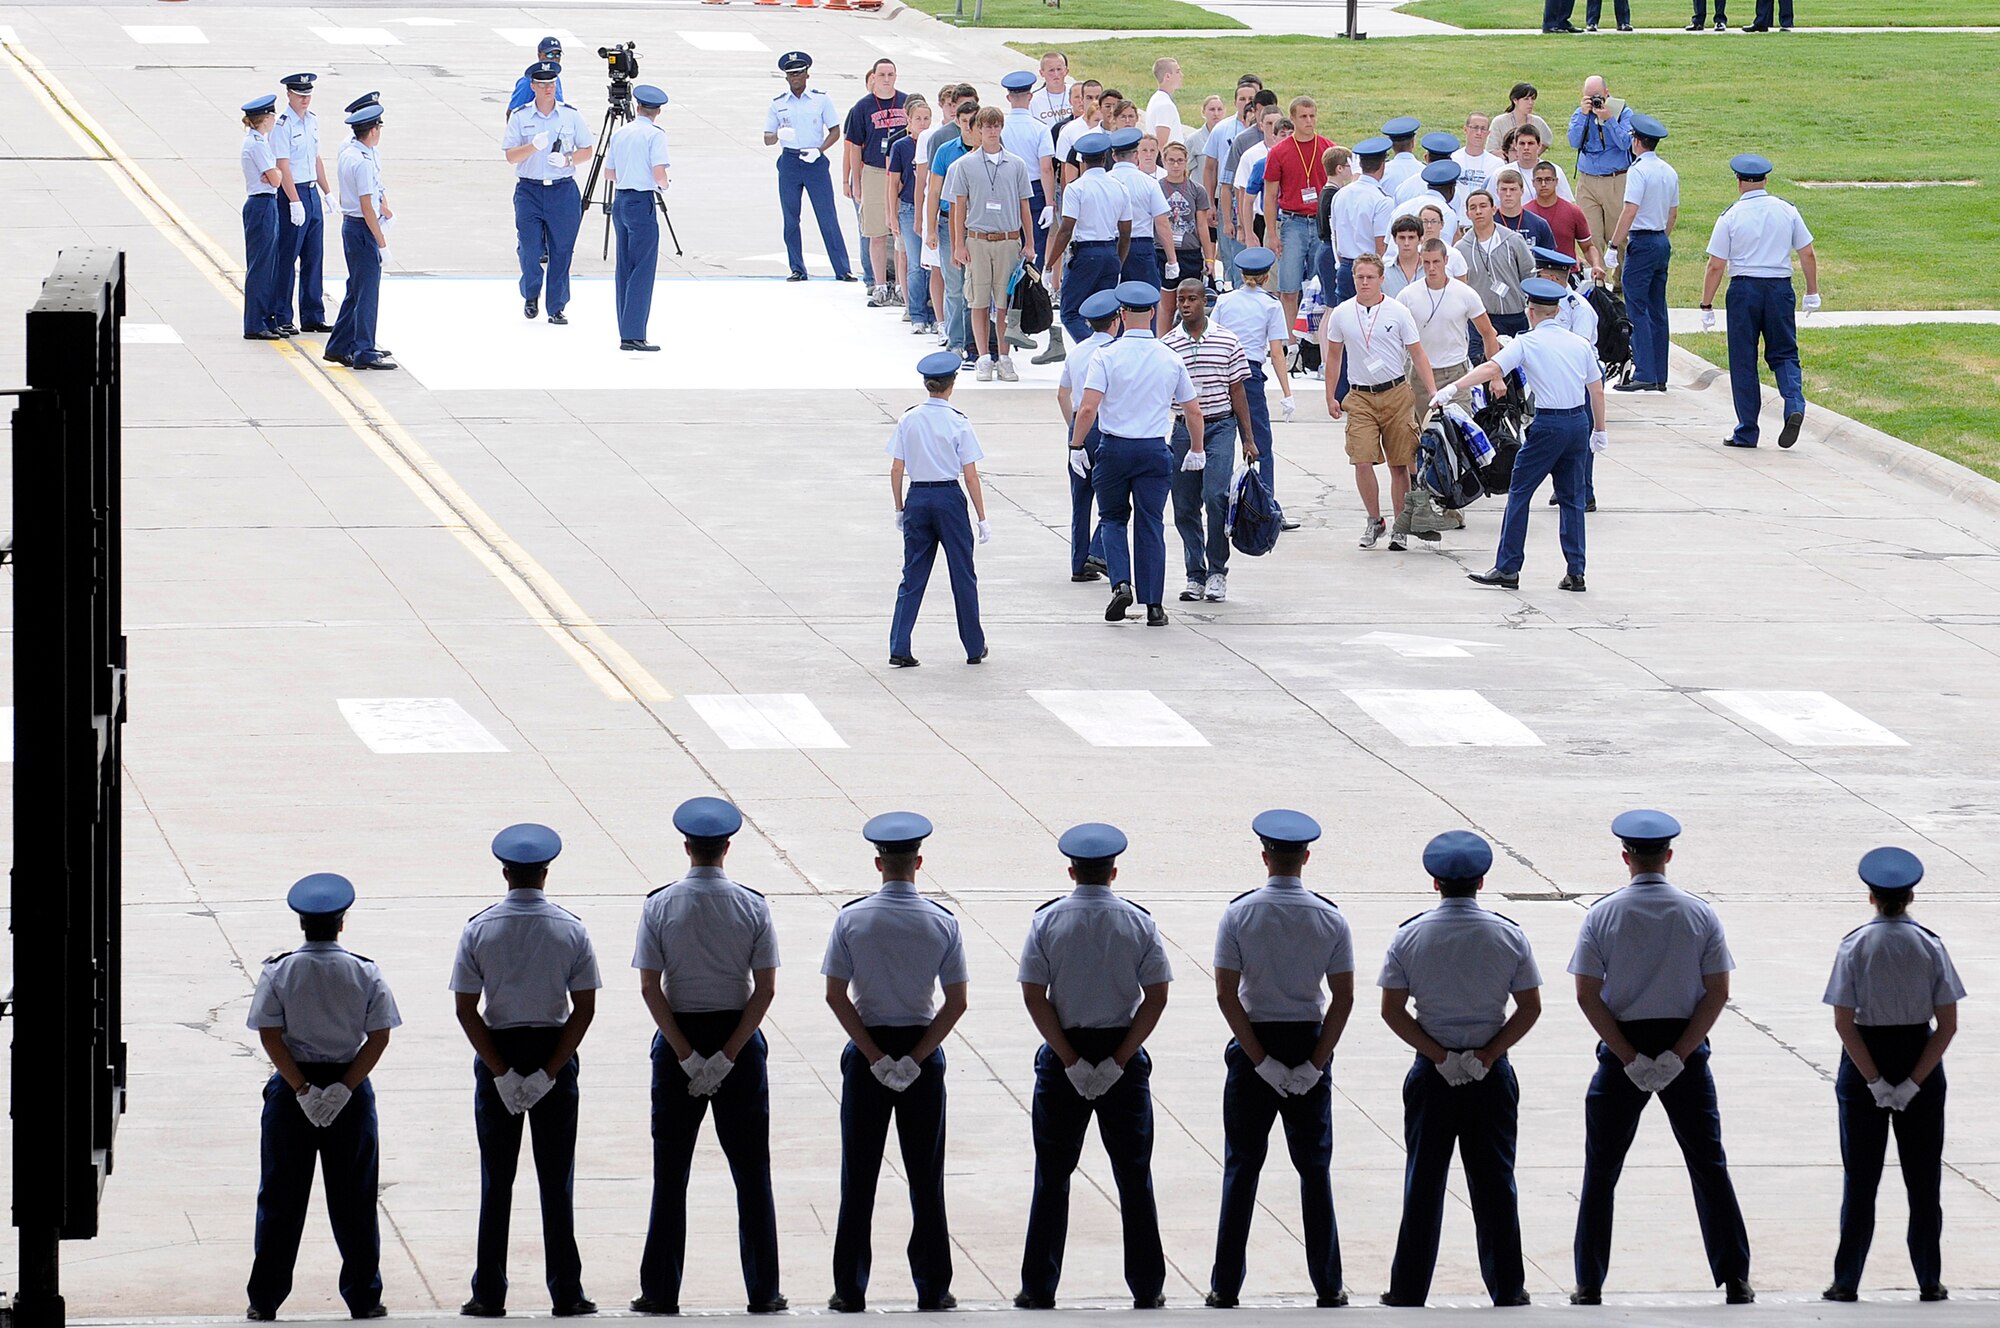 Basic cadets walk toward the core values ramp to the Terrazzo during cadet inprocessing June 25 at the U.S. Air Force Academy in Colorado Springs, Colo. More than 1,300 cadets were accepted to the Class of 2013, out of nearly 10,000 who applied. (U.S. Air Force photo/Mike Kaplan) 